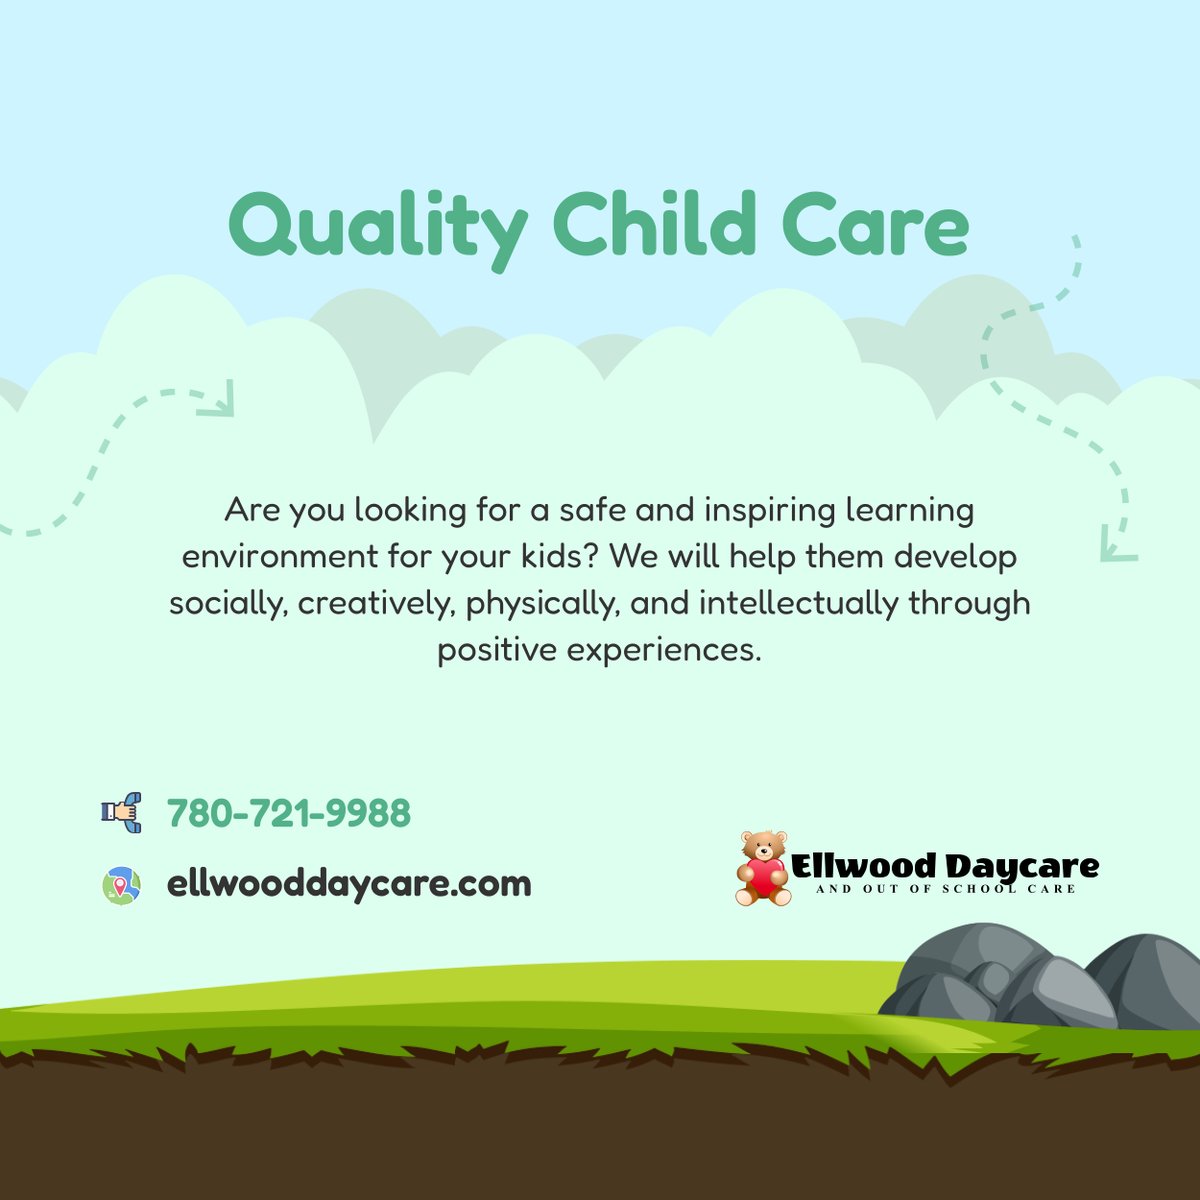 Are you looking for a safe and inspiring learning environment for your kids? We will help them develop socially, creatively, physically, and intellectually through positive experiences. How? Contact us today!

#Daycare #QualityChildCare #EdmontonAB